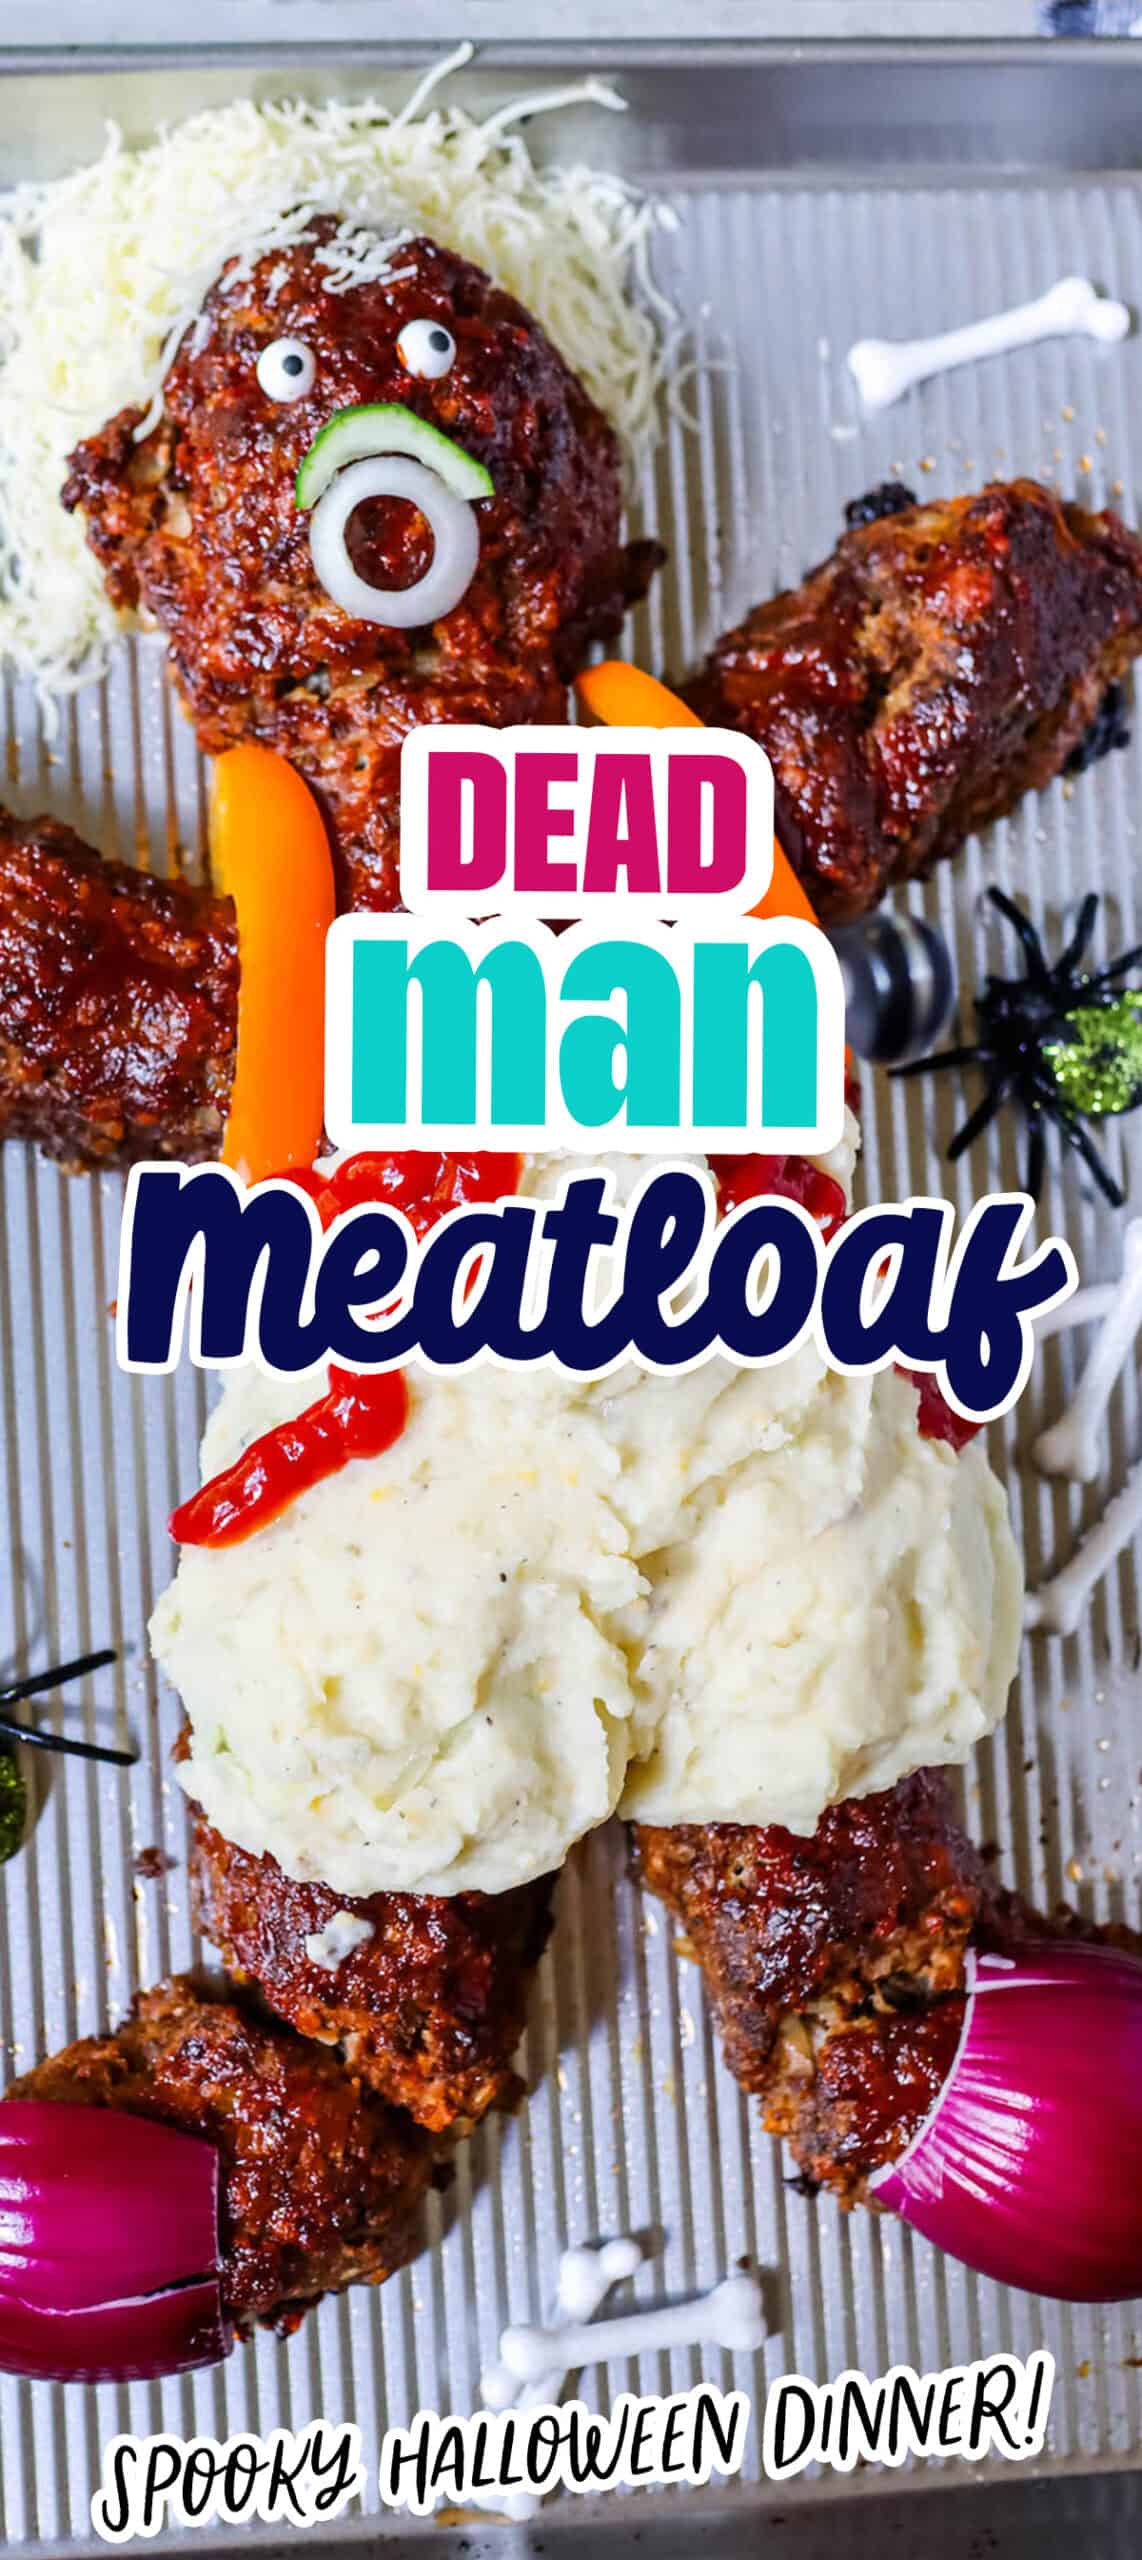 Prepare a spooky and delicious Halloween dinner with our mouthwatering dead man meatloaf.